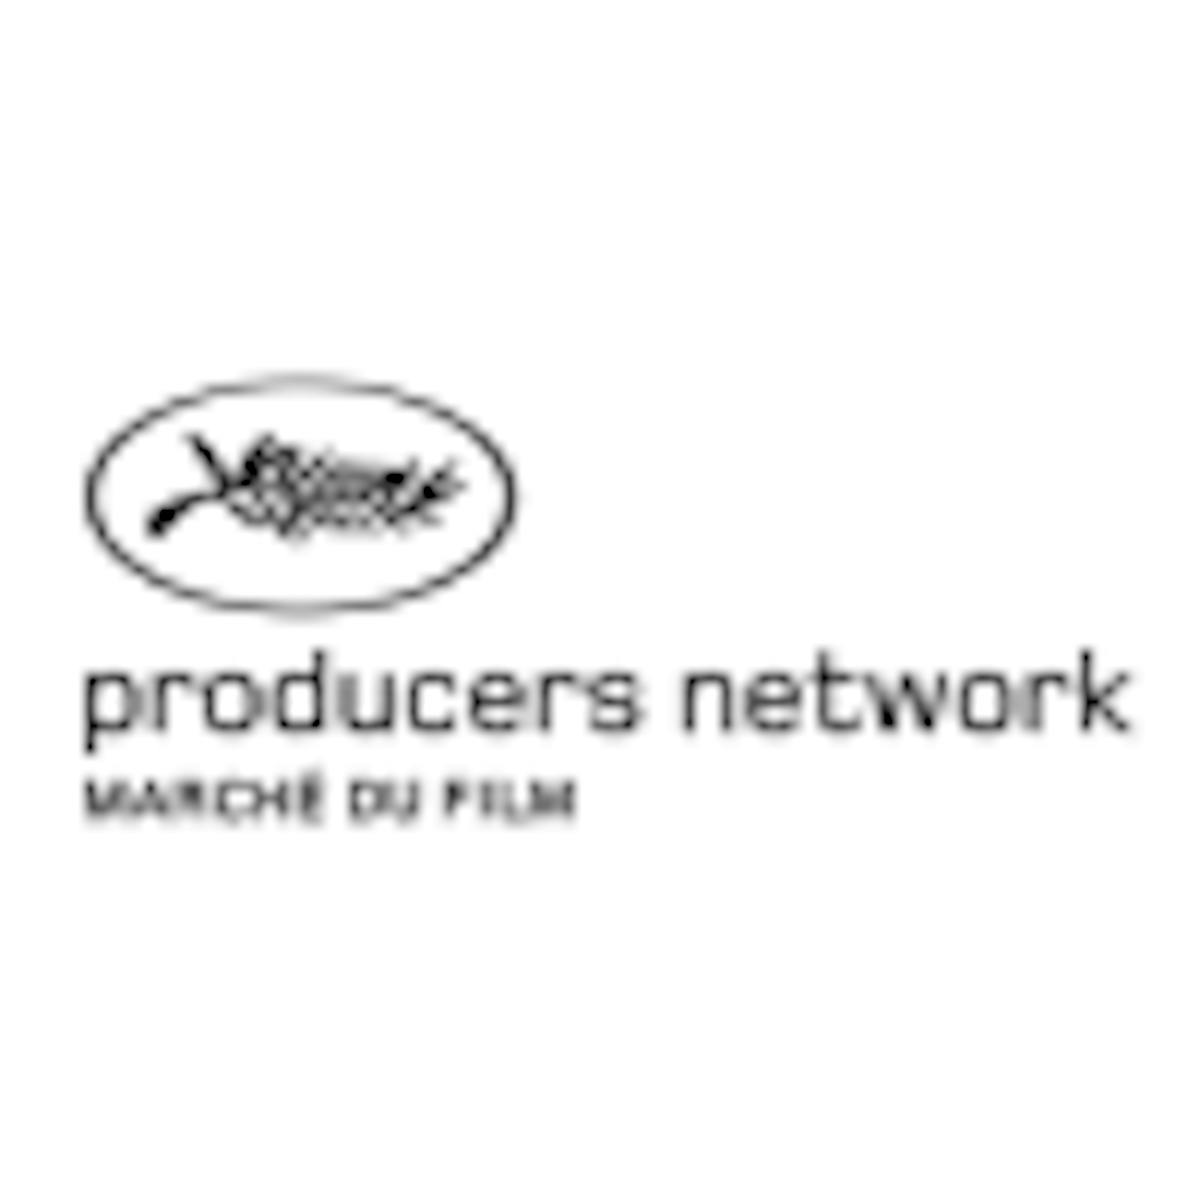 Producets network